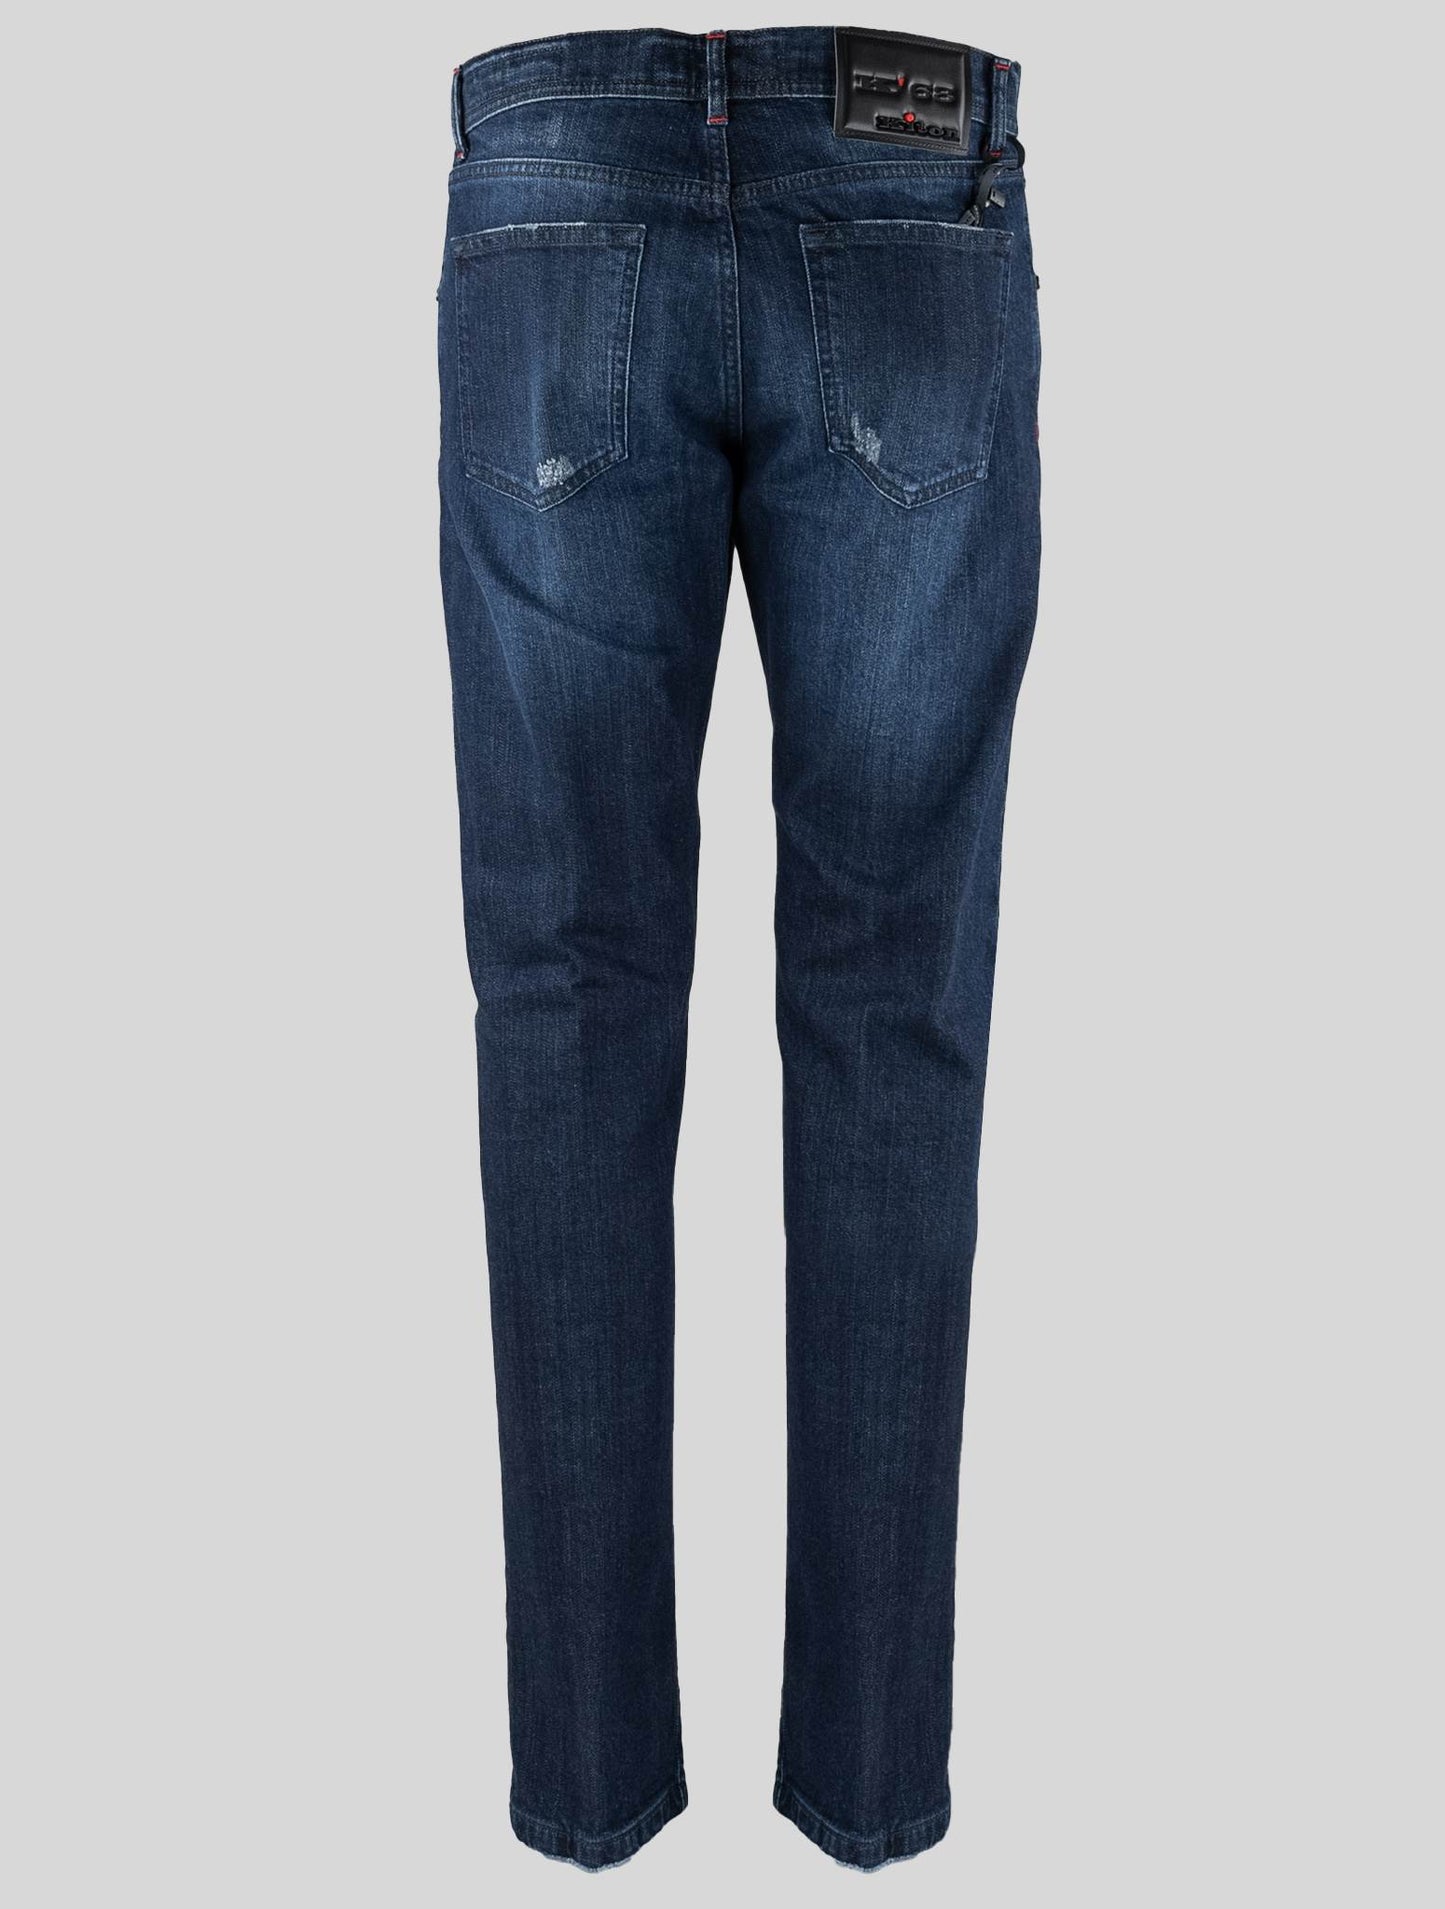 Kiton Blue Cotton Ea Jeans Limited Edition 17 of 22